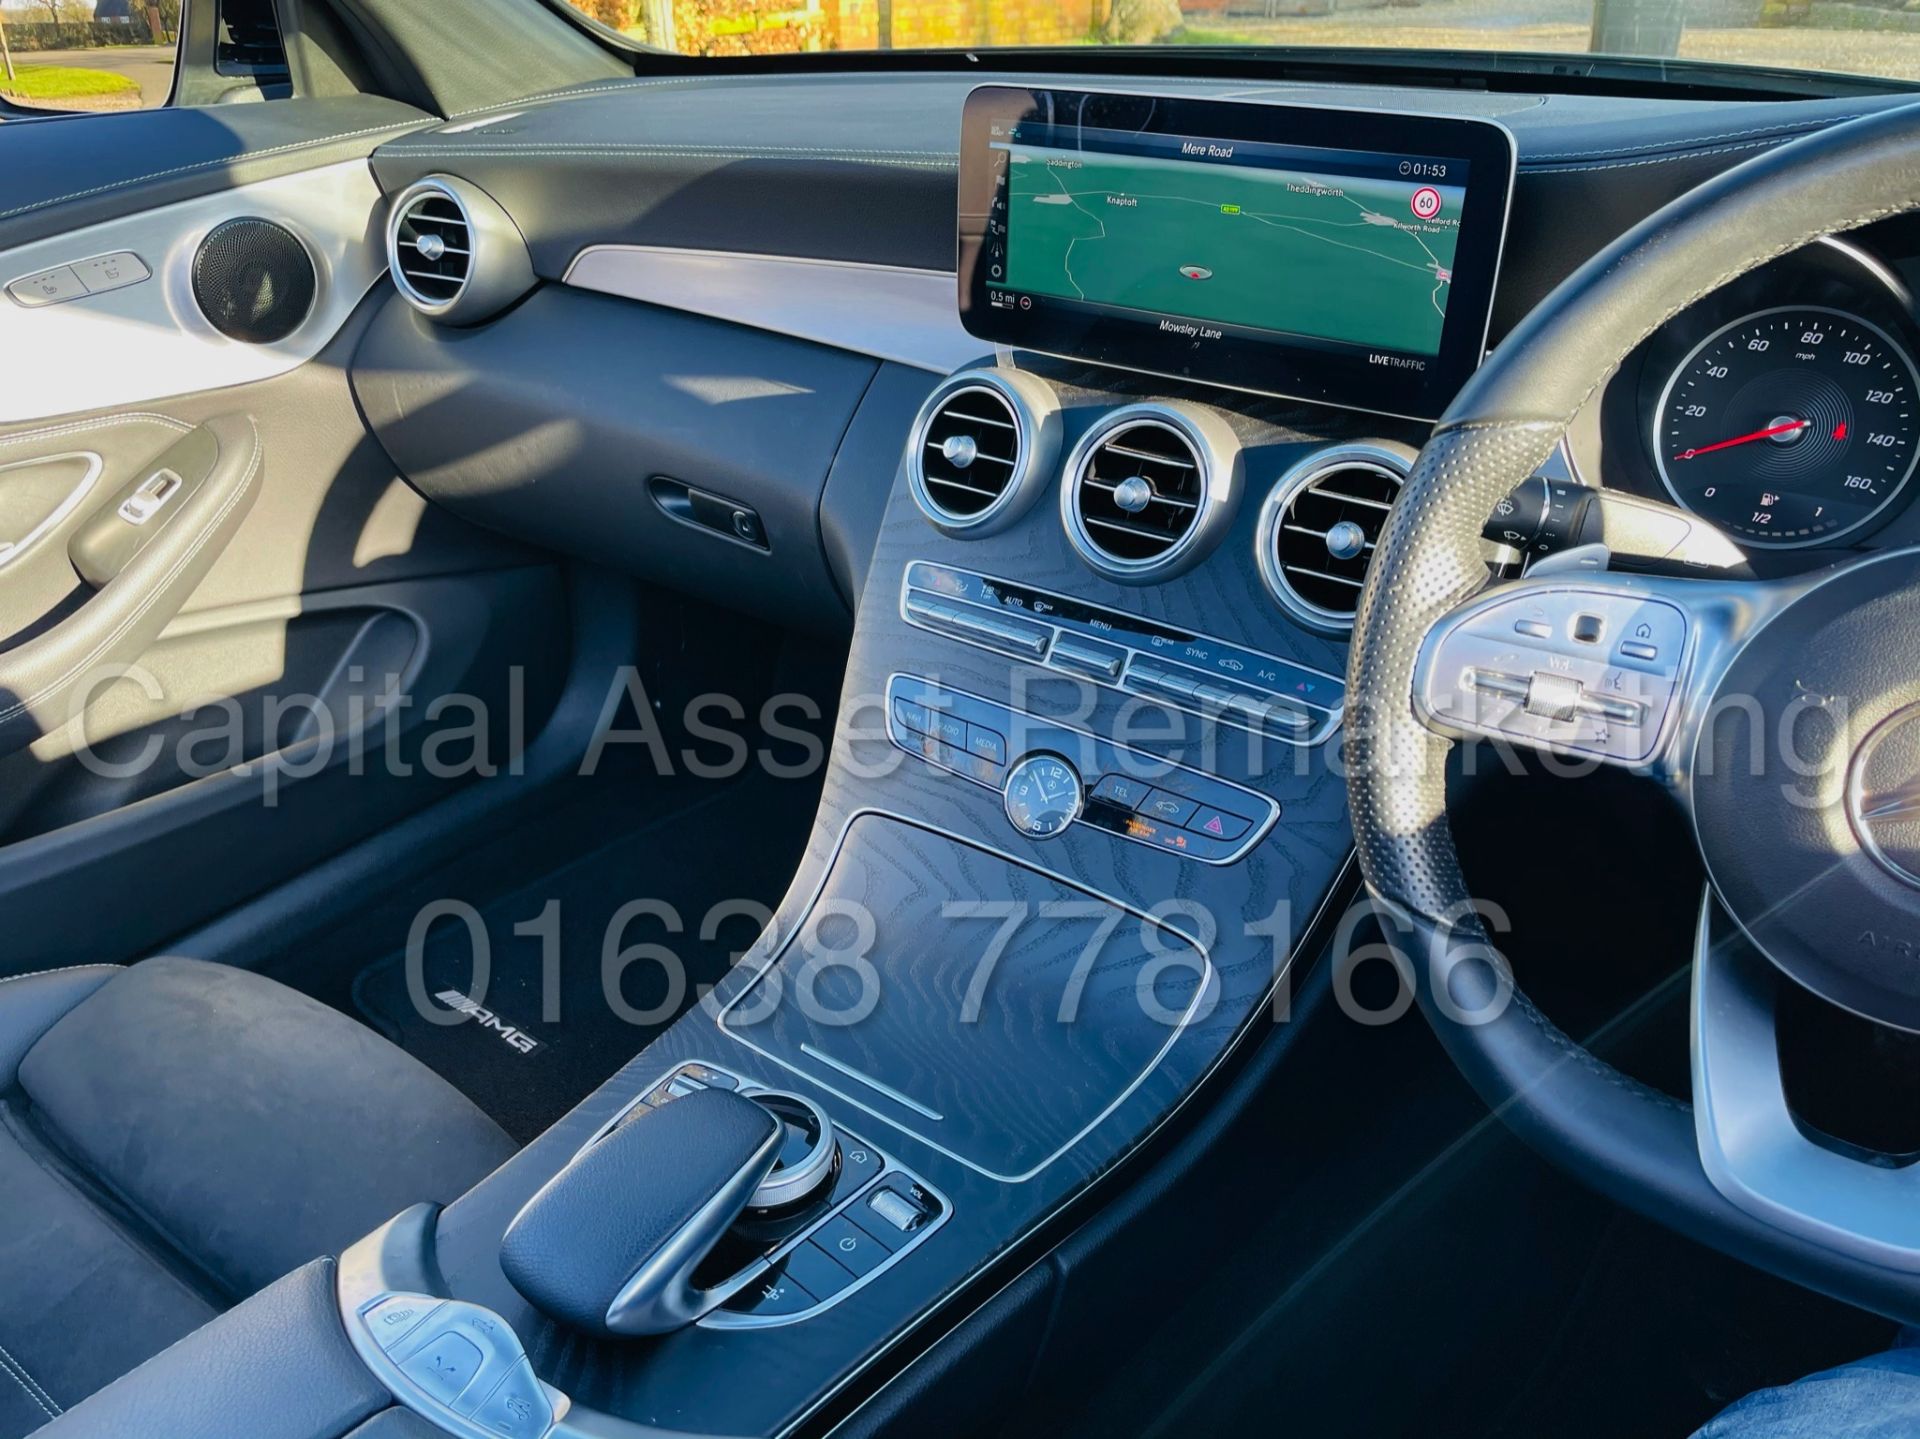 ON SALE MERCEDES-BENZ C220D *AMG LINE - CABRIOLET* (2019) '9G TRONIC AUTO - LEATHER - SAT NAV' - Image 49 of 59